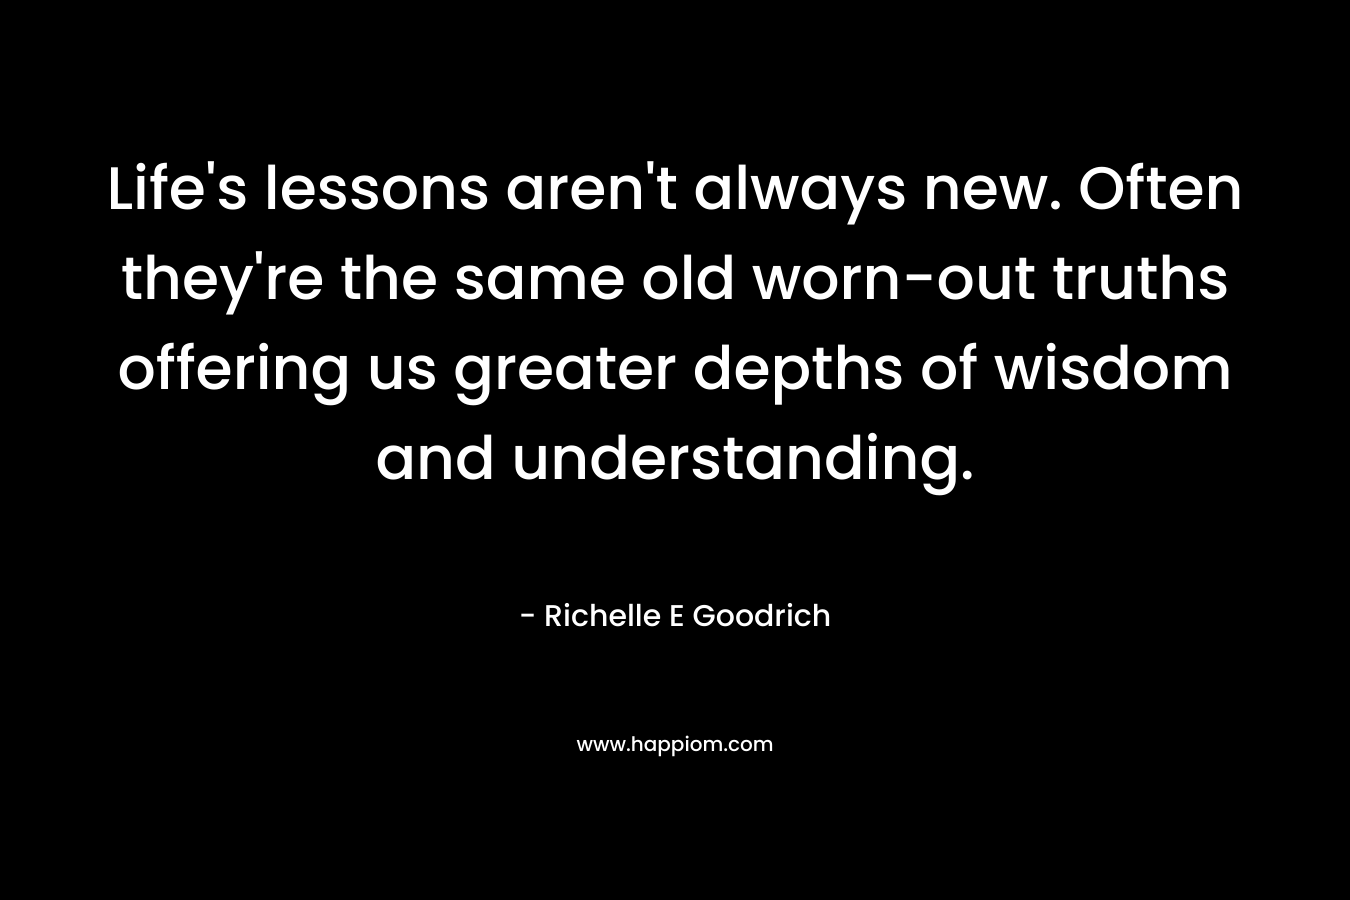 Life's lessons aren't always new. Often they're the same old worn-out truths offering us greater depths of wisdom and understanding.